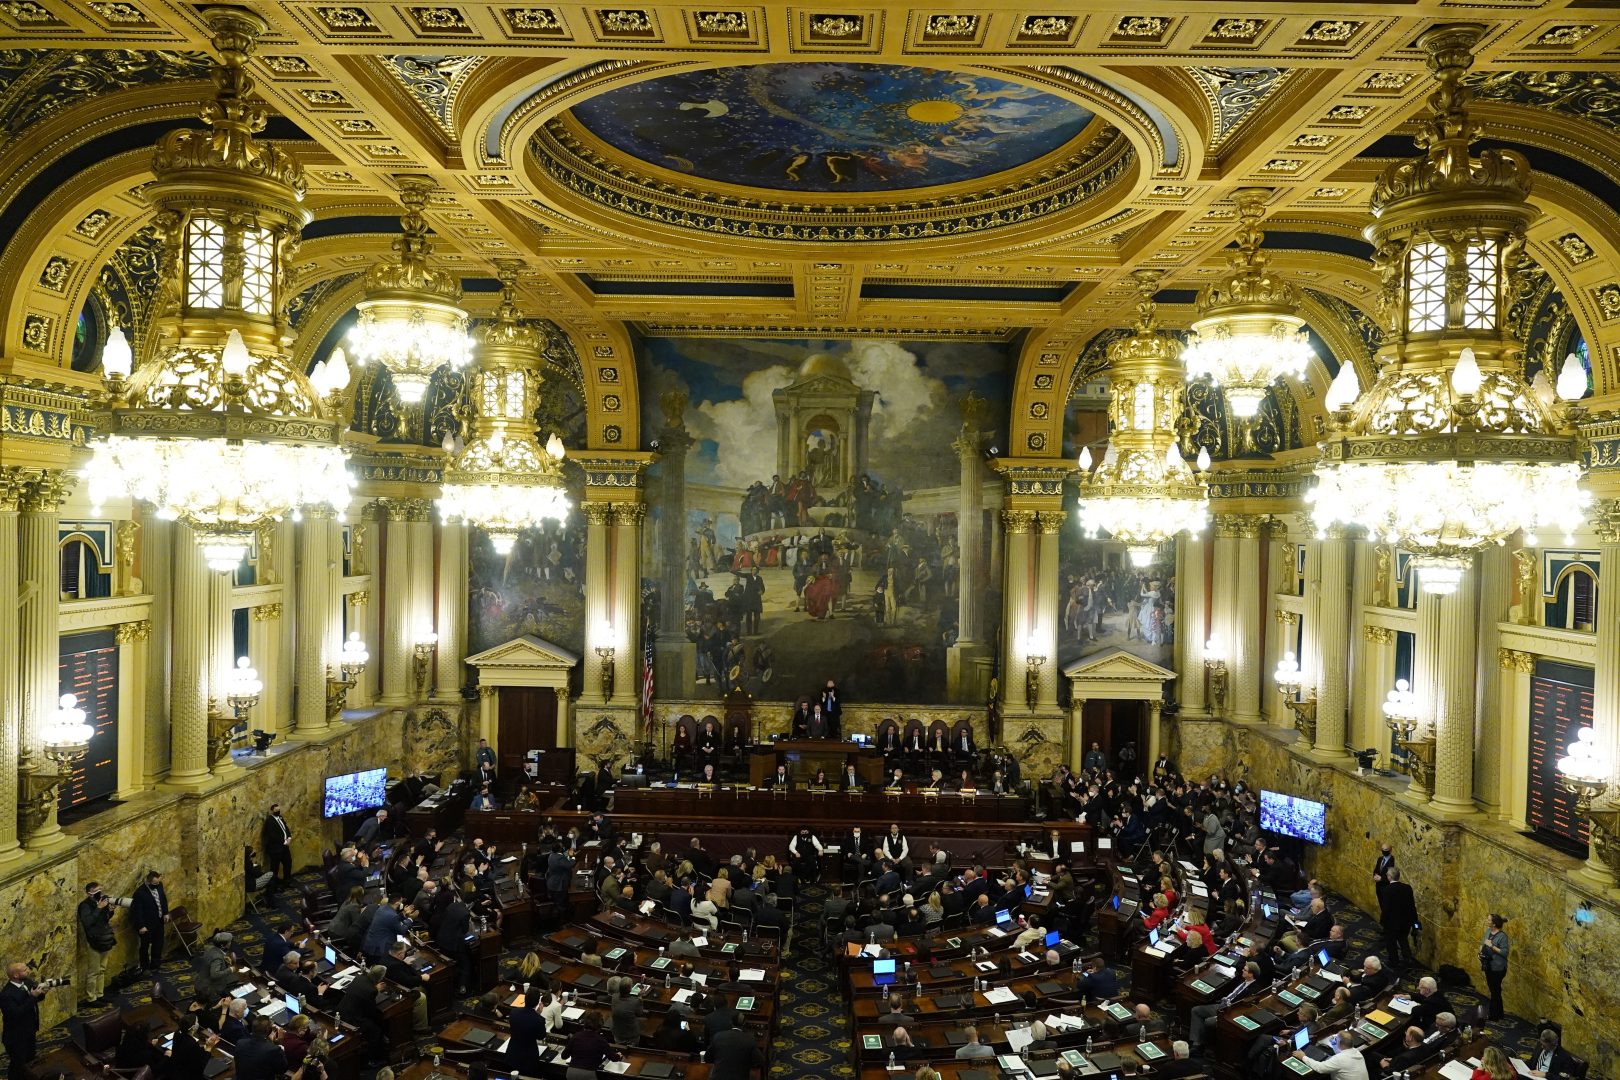 Democratic Gov. Tom Wolf delivers his budget address for the 2022-23 fiscal year to a joint session of the Pennsylvania House and Senate in Harrisburg, Pa., Tuesday, Feb. 8, 2022. (AP Photo/Matt Rourke)